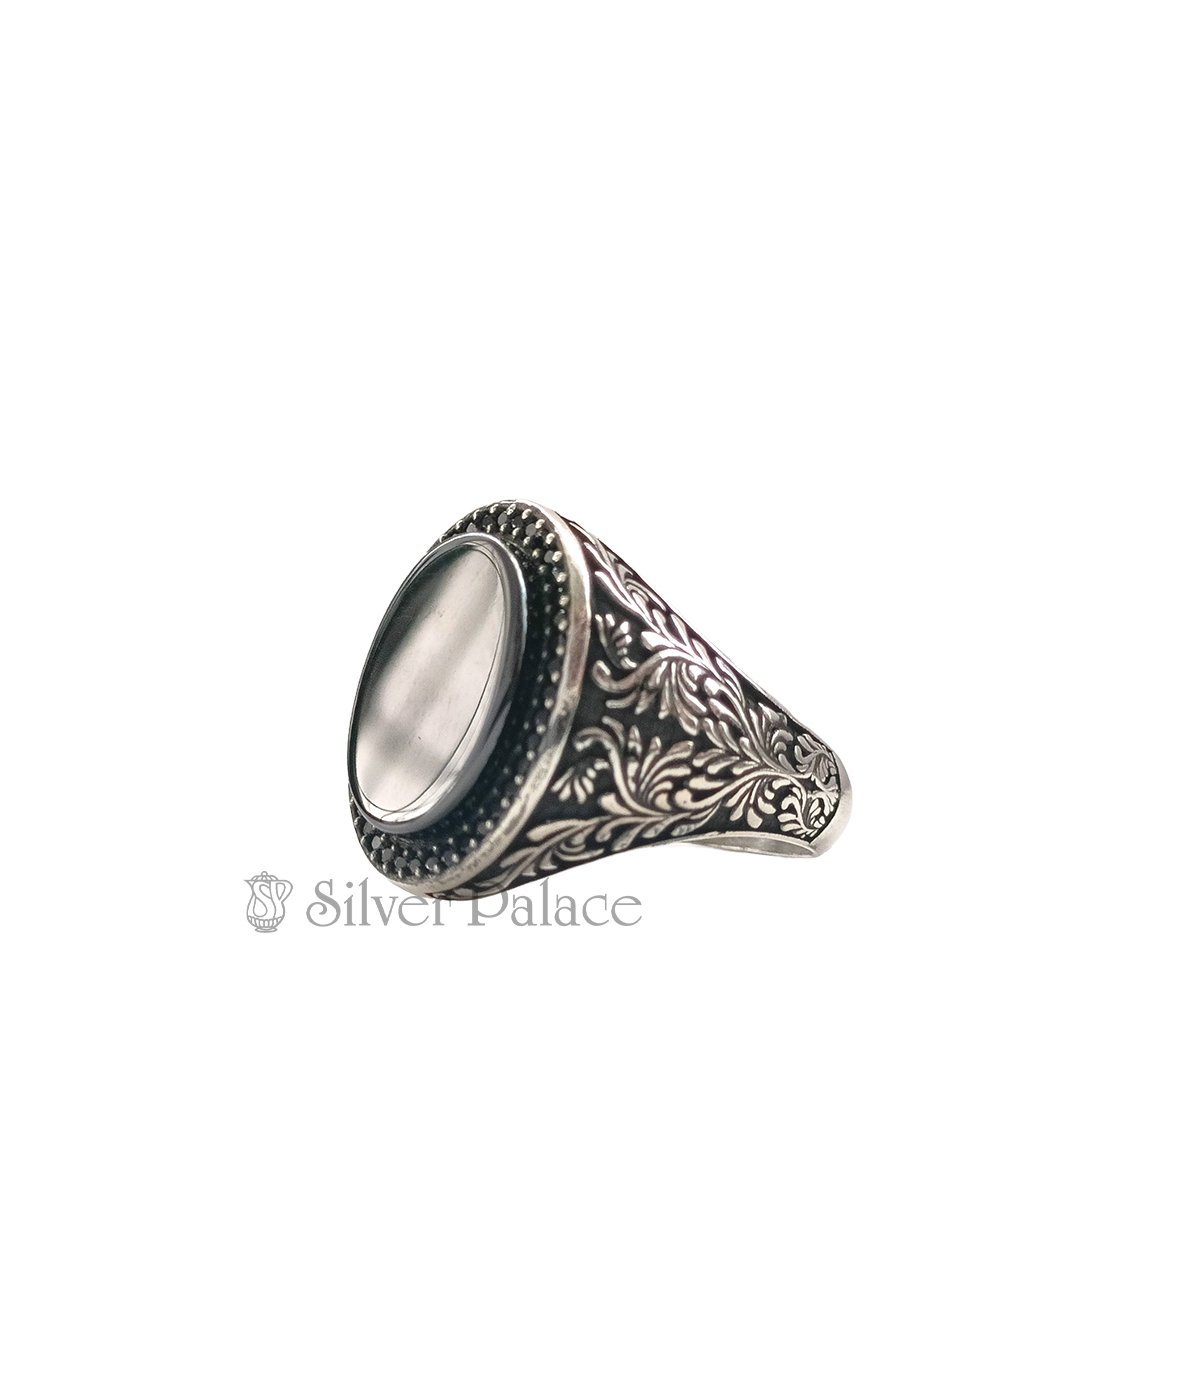 STERLING SILVER MENS RING WITH OVAL GEMSTONE TURKEY